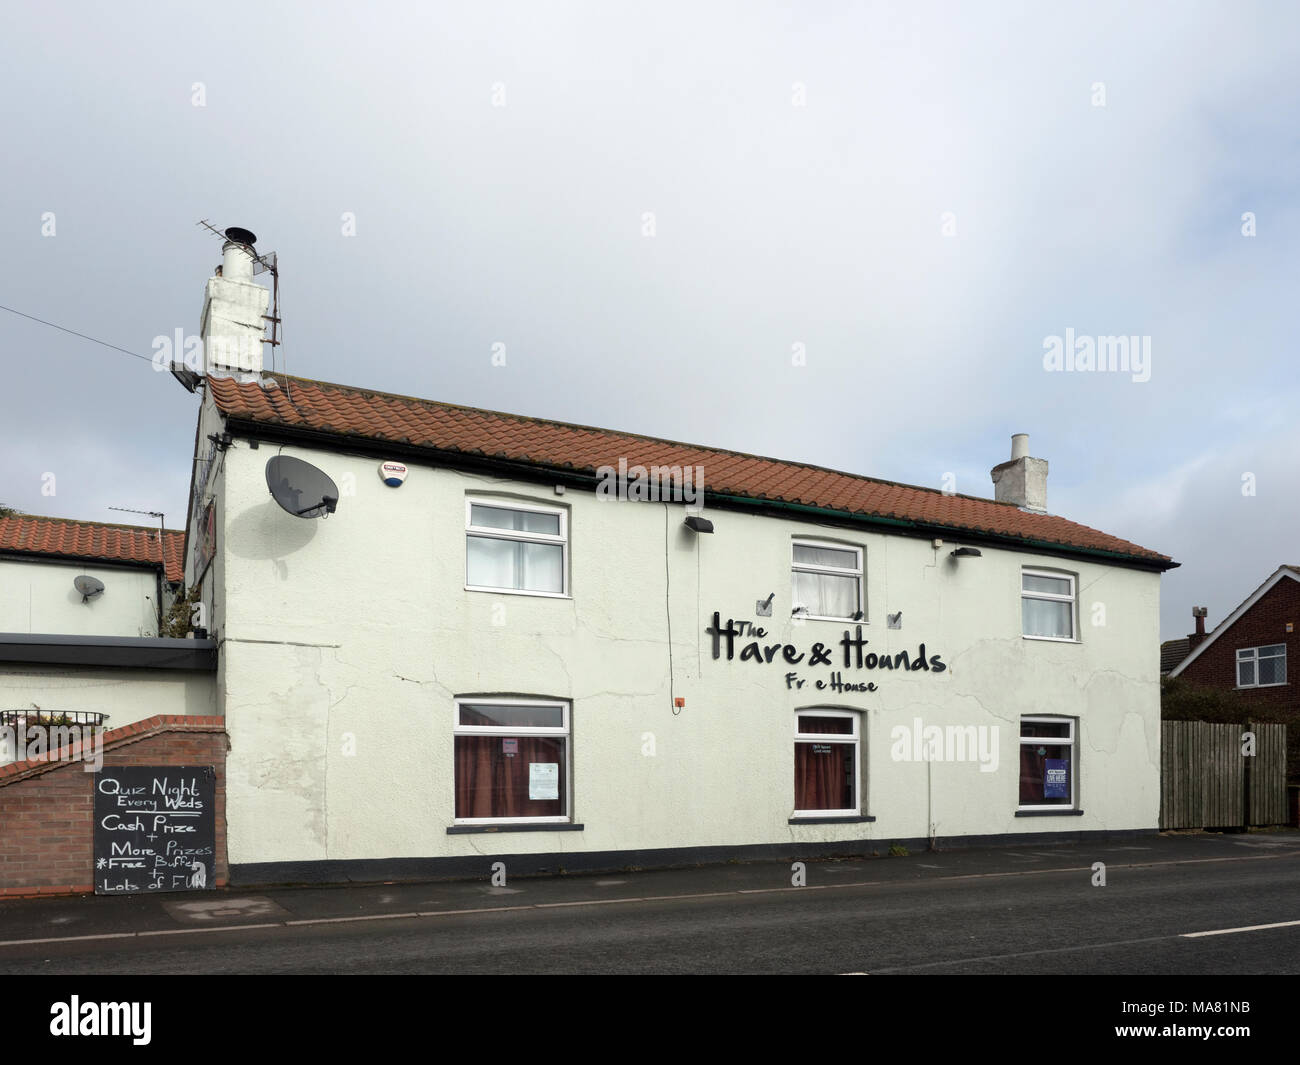 Hare and Hounds public house, High Street, Holme on Spalding Moor, East Riding of Yorkshire, England, United Kingdom Stock Photo